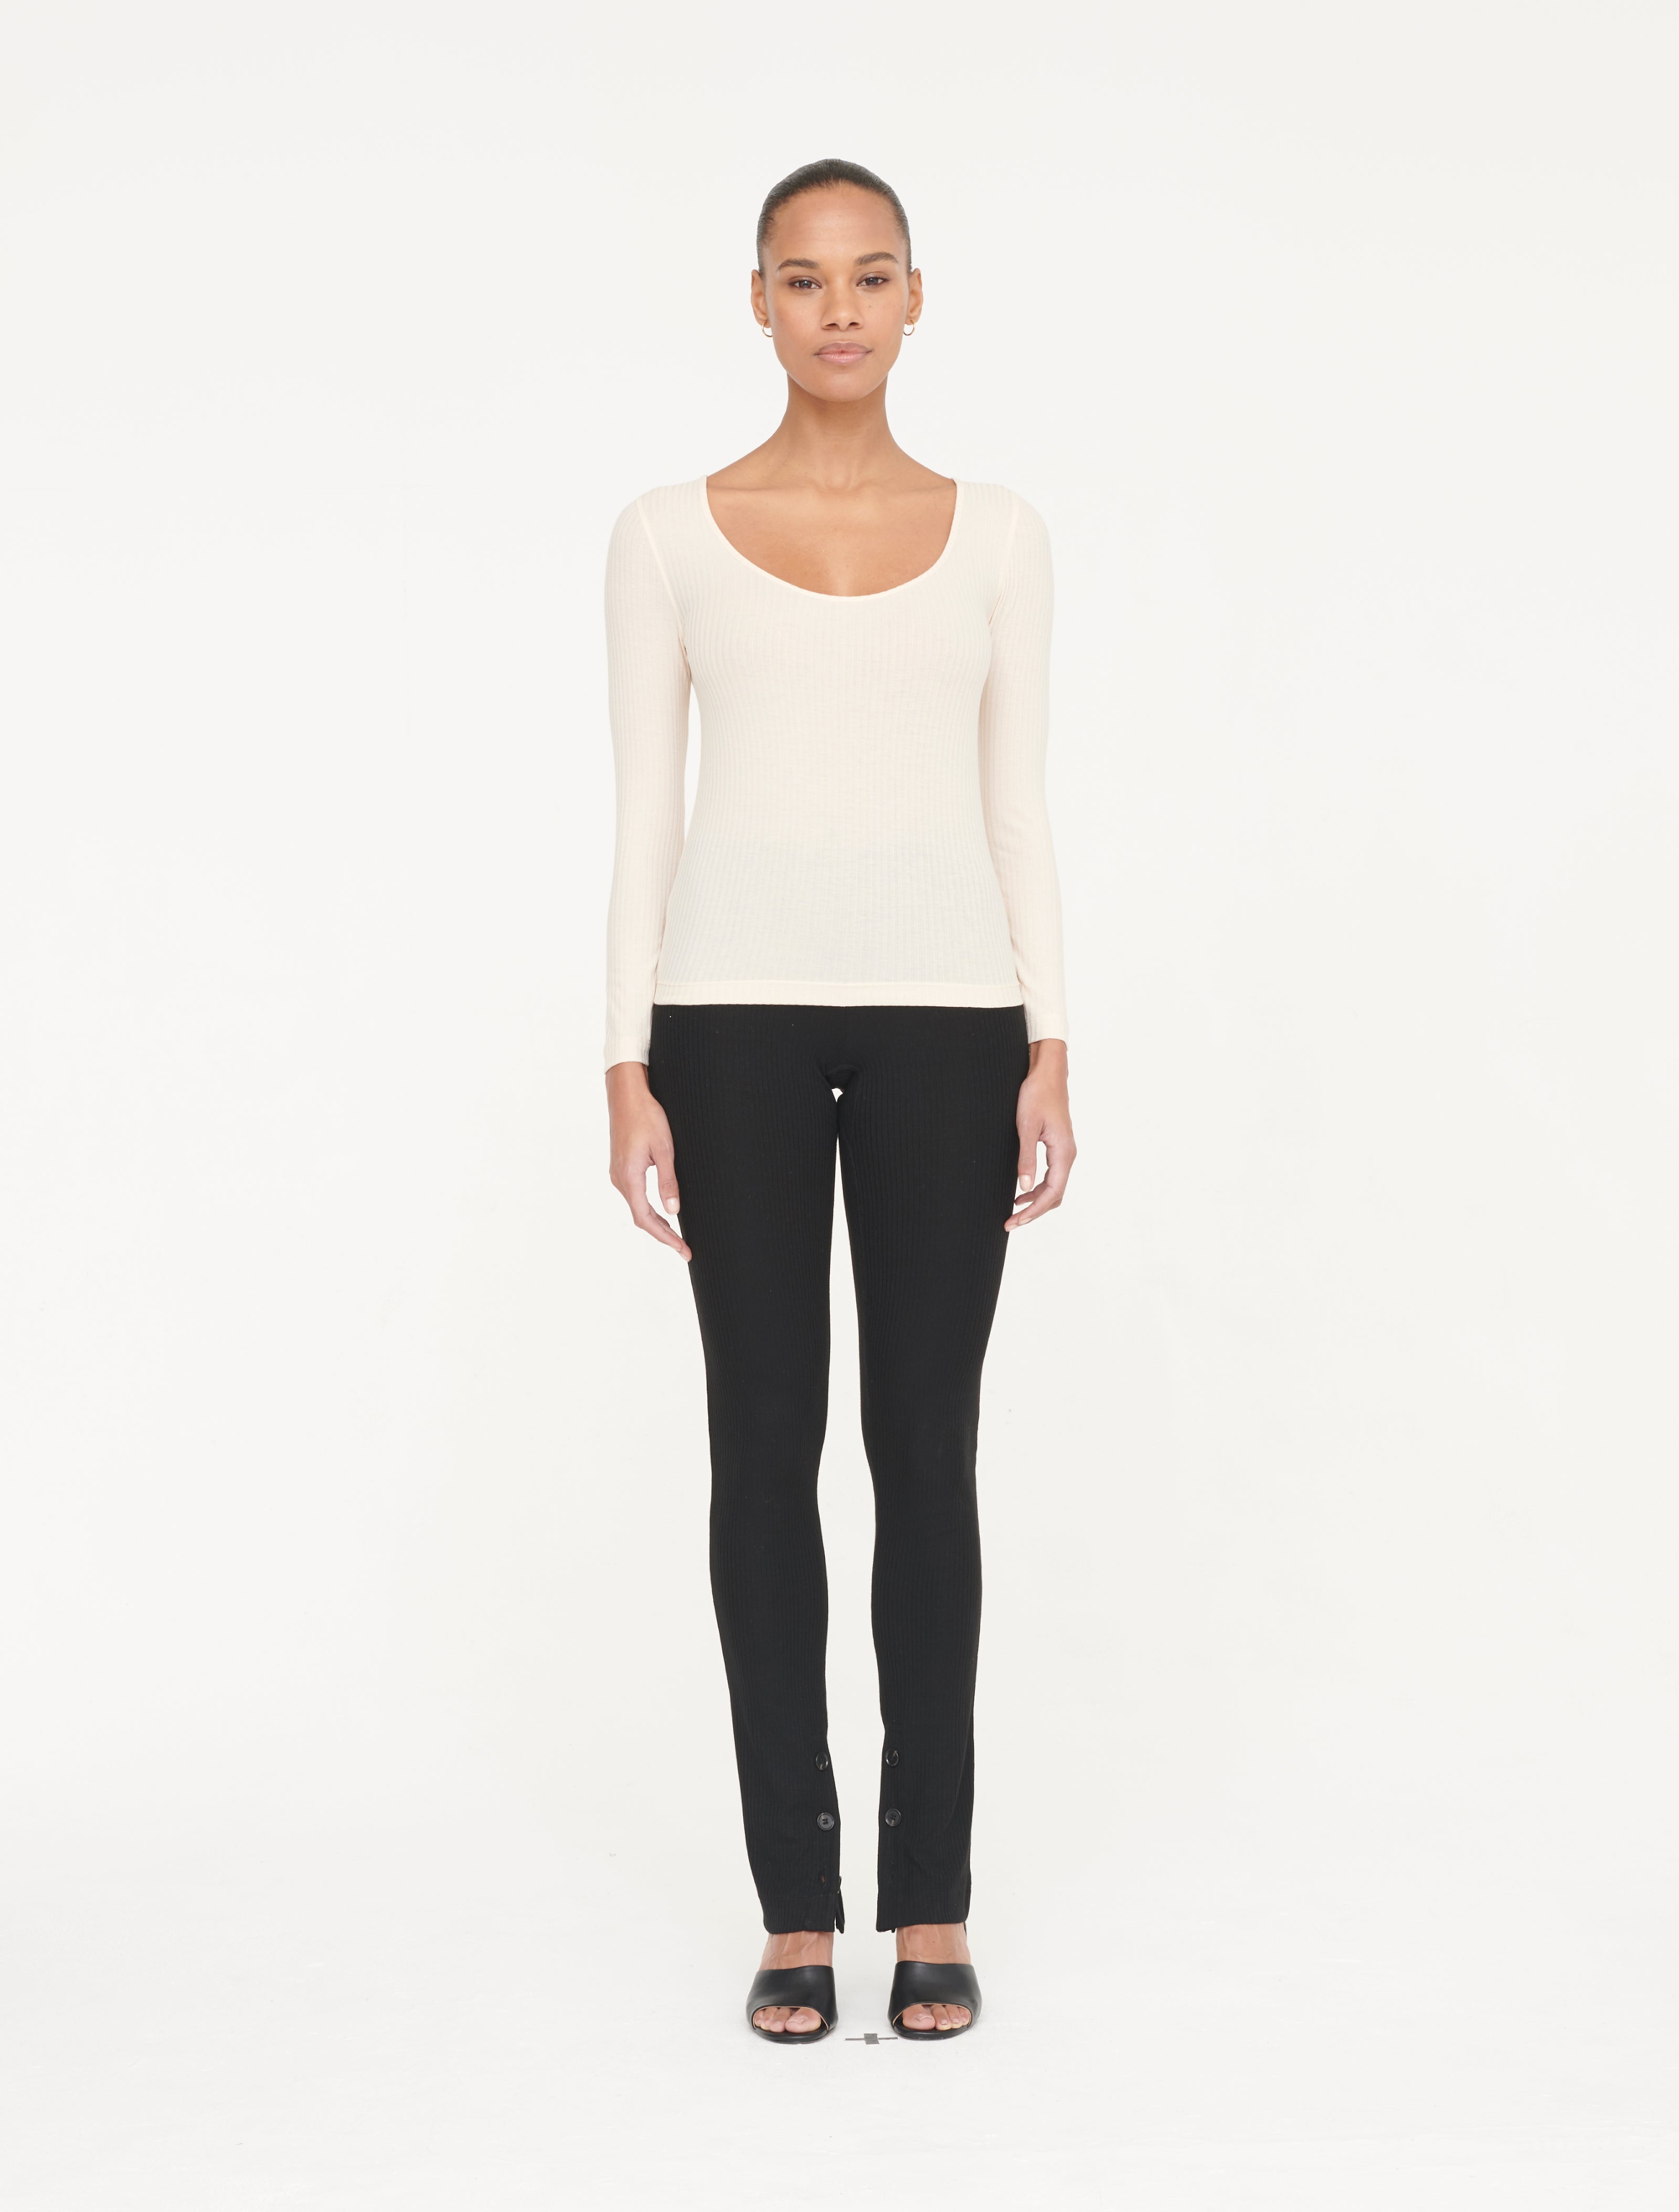 Ninety Percent Amelia SeaCell Rib Scoop Neck in Frost